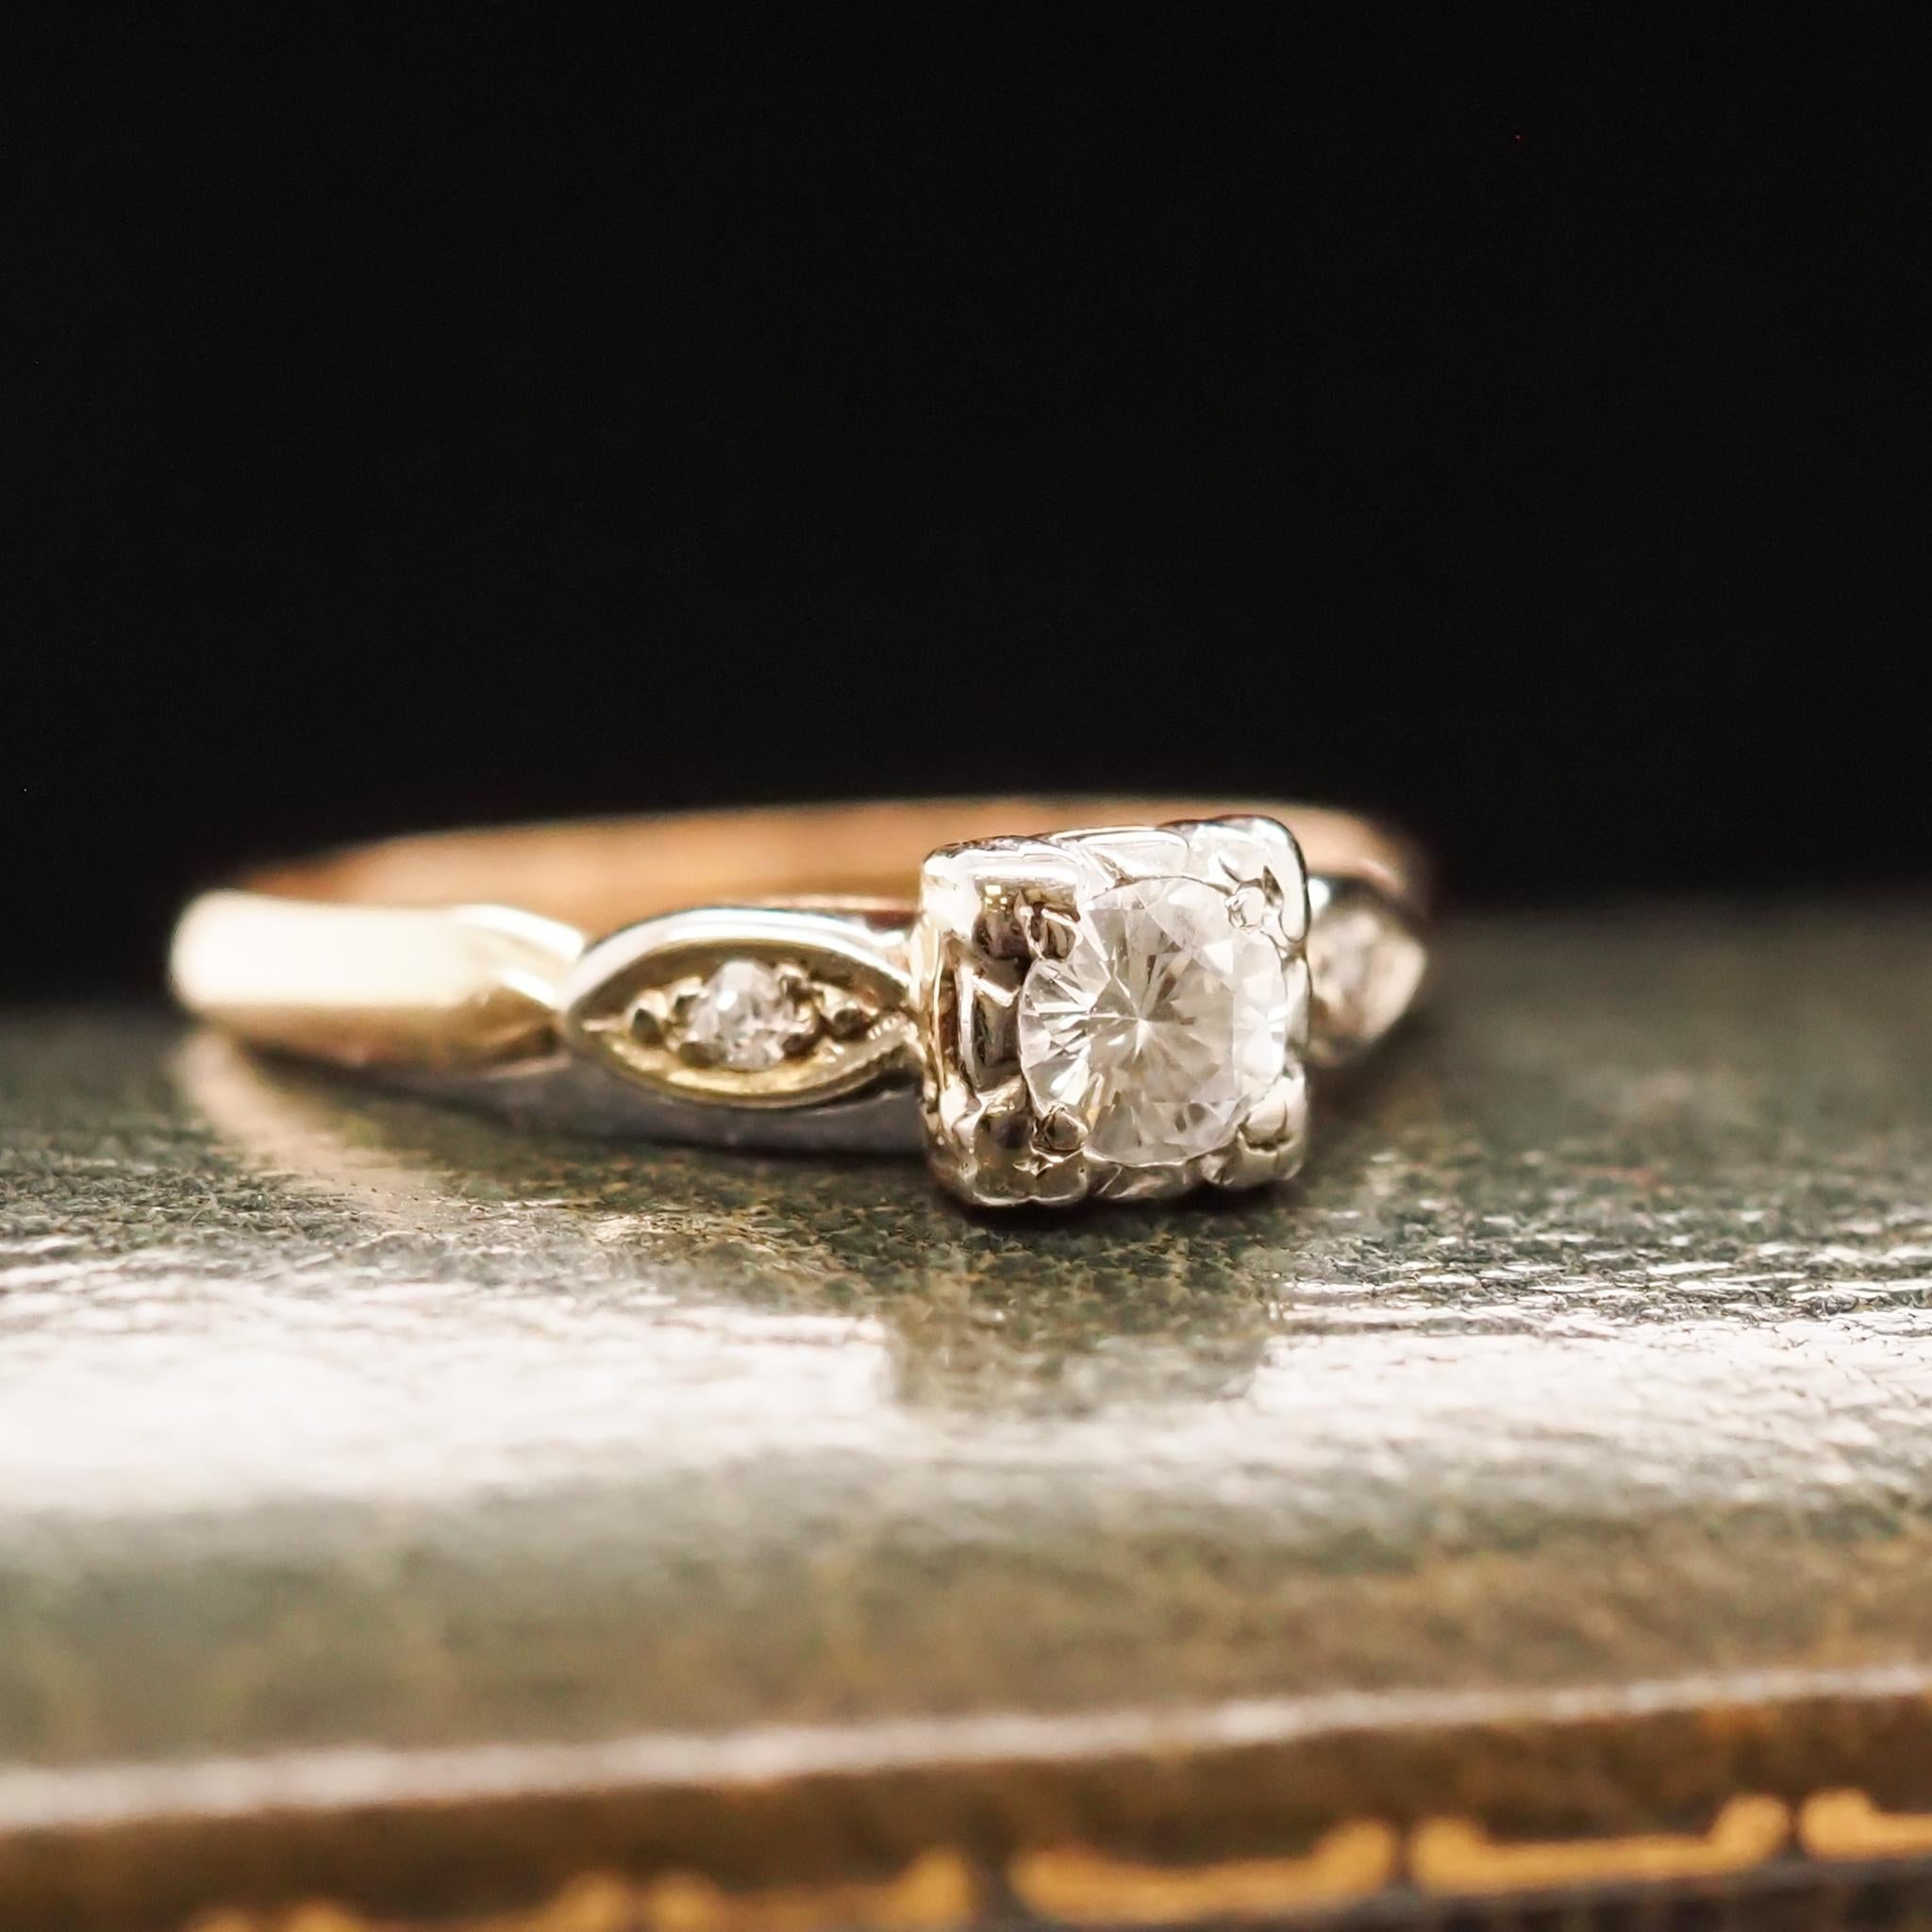 Year: 1943
Item Details:
Ring Size: 7.5
Metal Type: 14K Yellow Gold [Hallmarked, and Tested]
Weight: 2.3grams
Diamond Details: .30ct, Old European Brilliant, Natural Diamond, G Color, VS Clarity
Side Stone Details: .04ct, Antique Round, G-H, VS